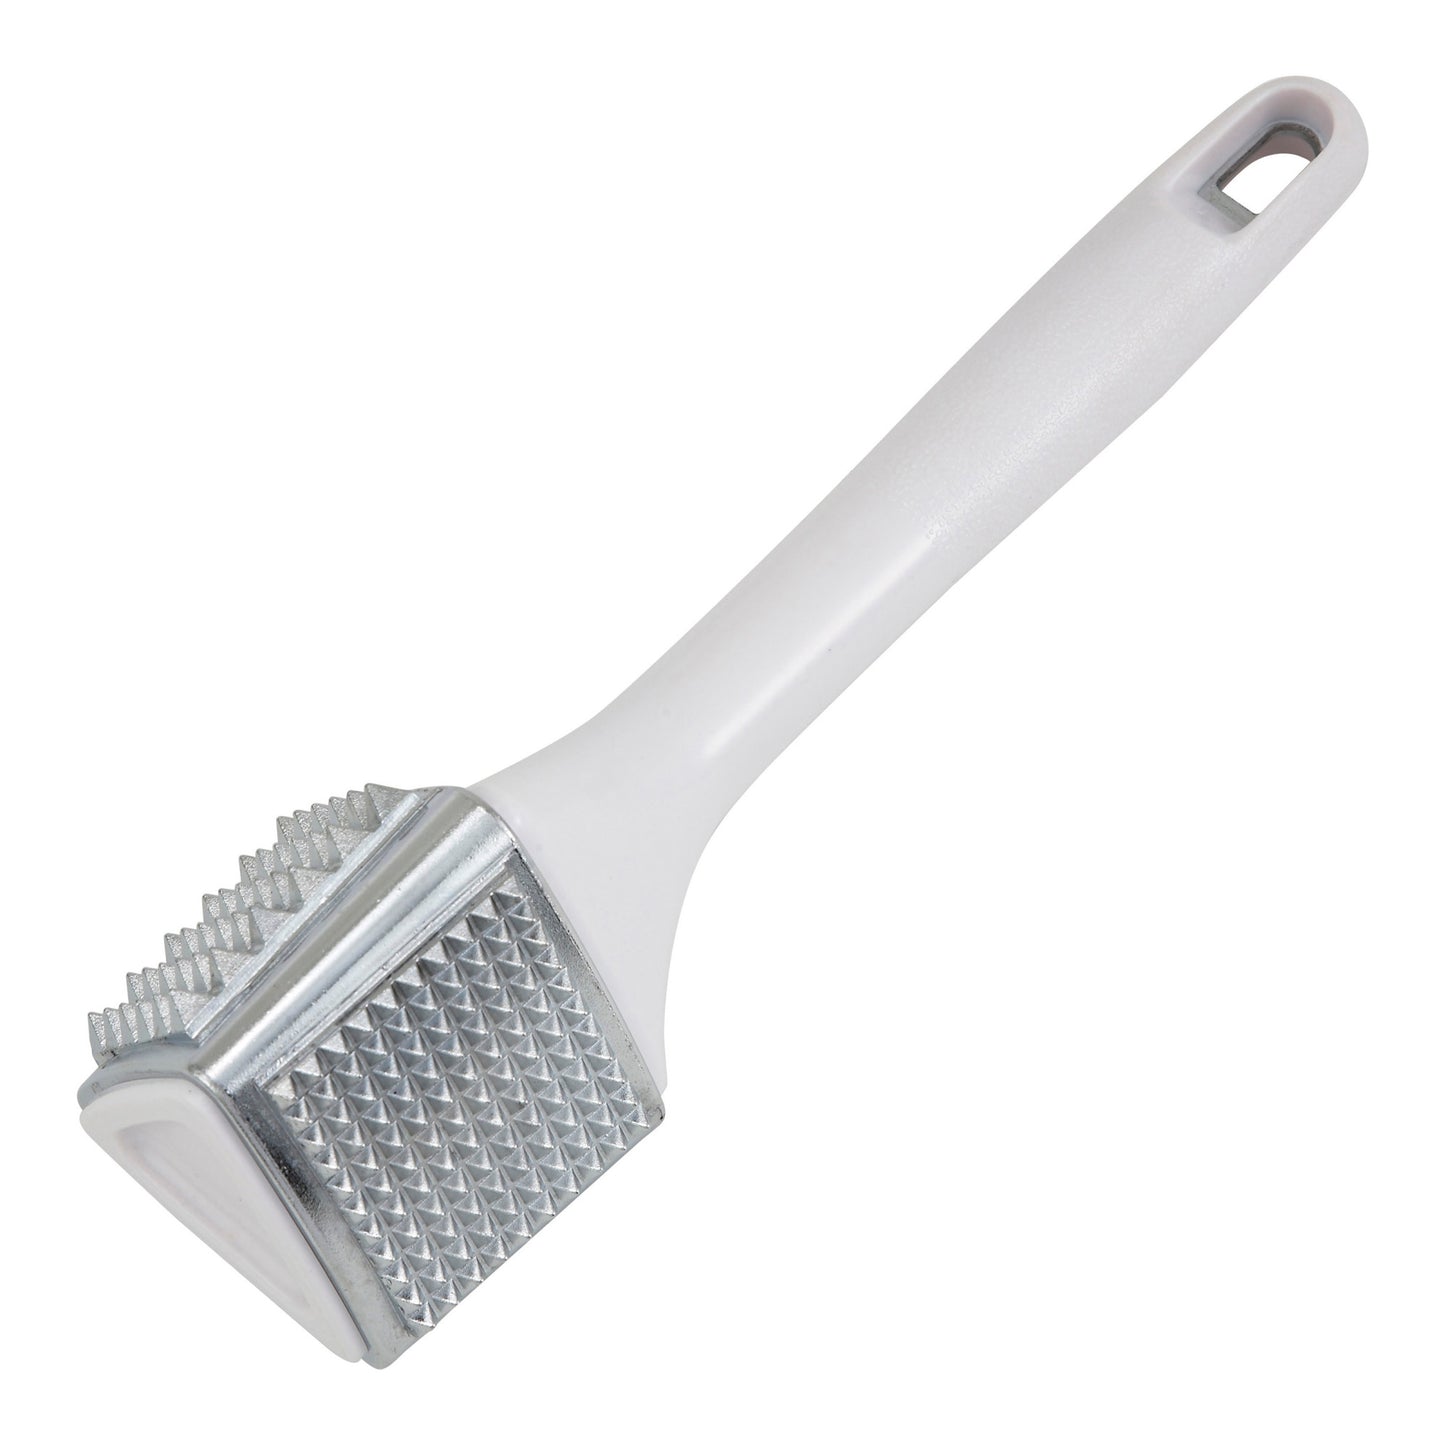 AMT-3 - 3-Sided Meat Tenderizer, Aluminum